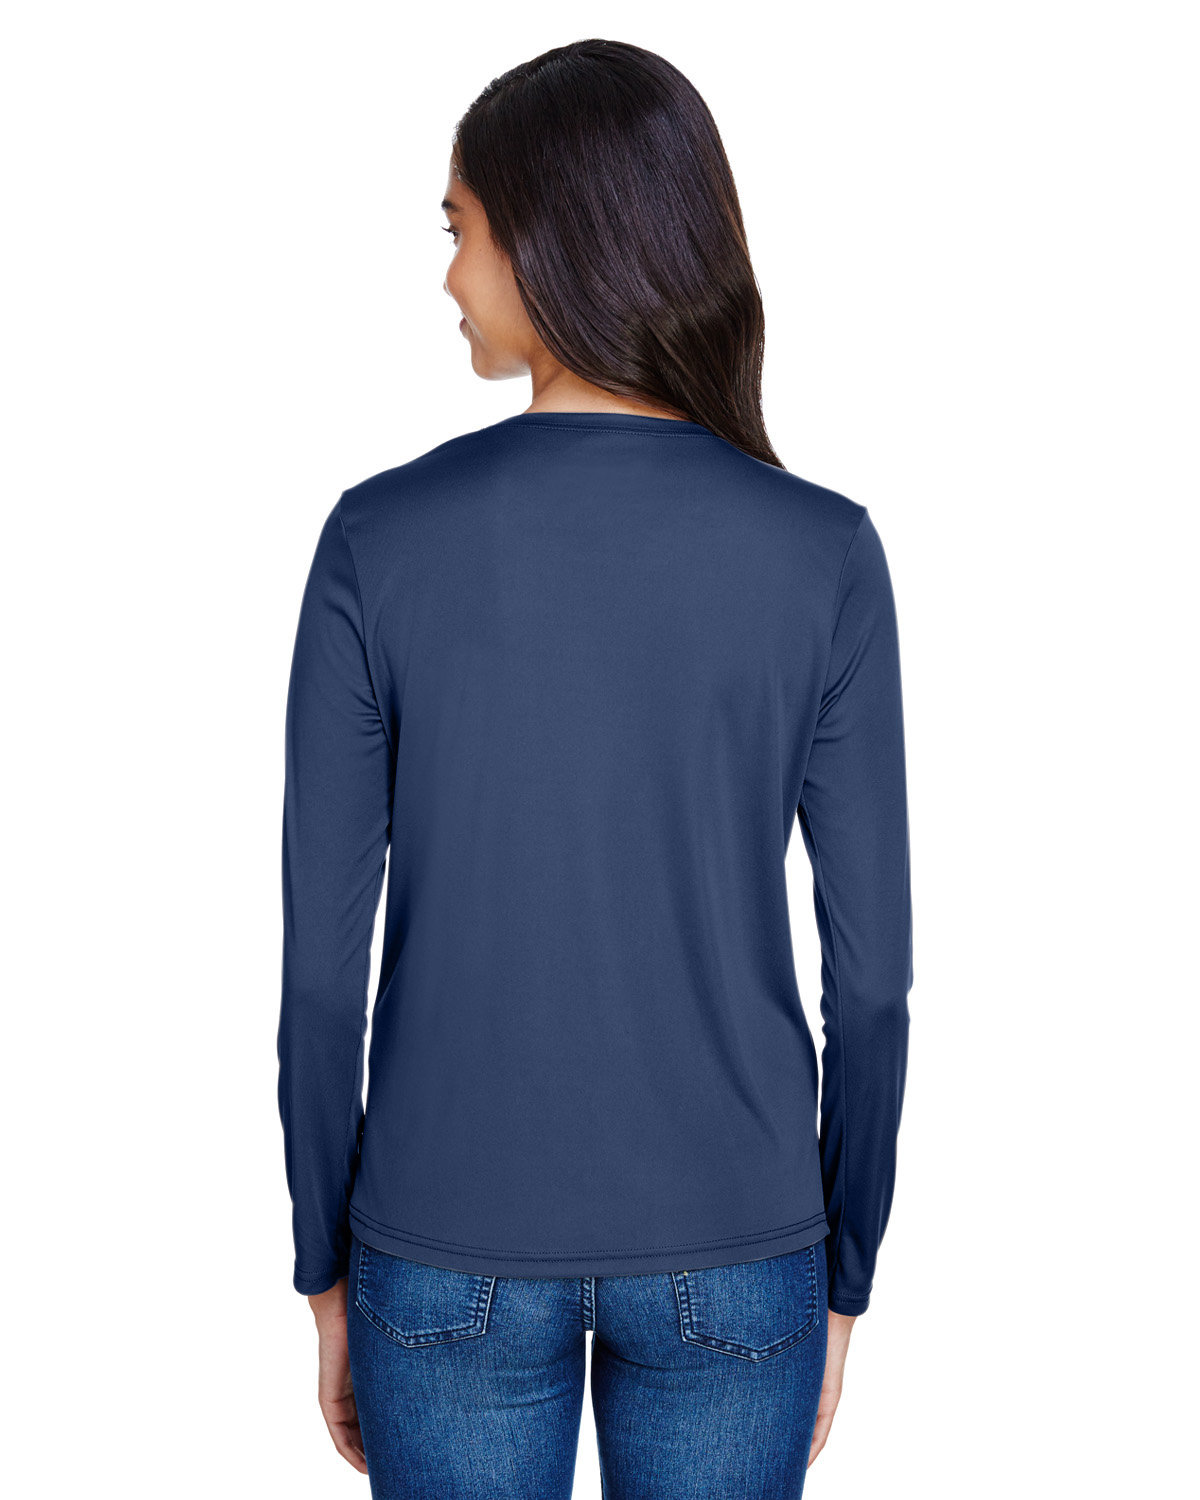 A4 Ladies' Long Sleeve Cooling Performance Crew Shirt | alphabroder